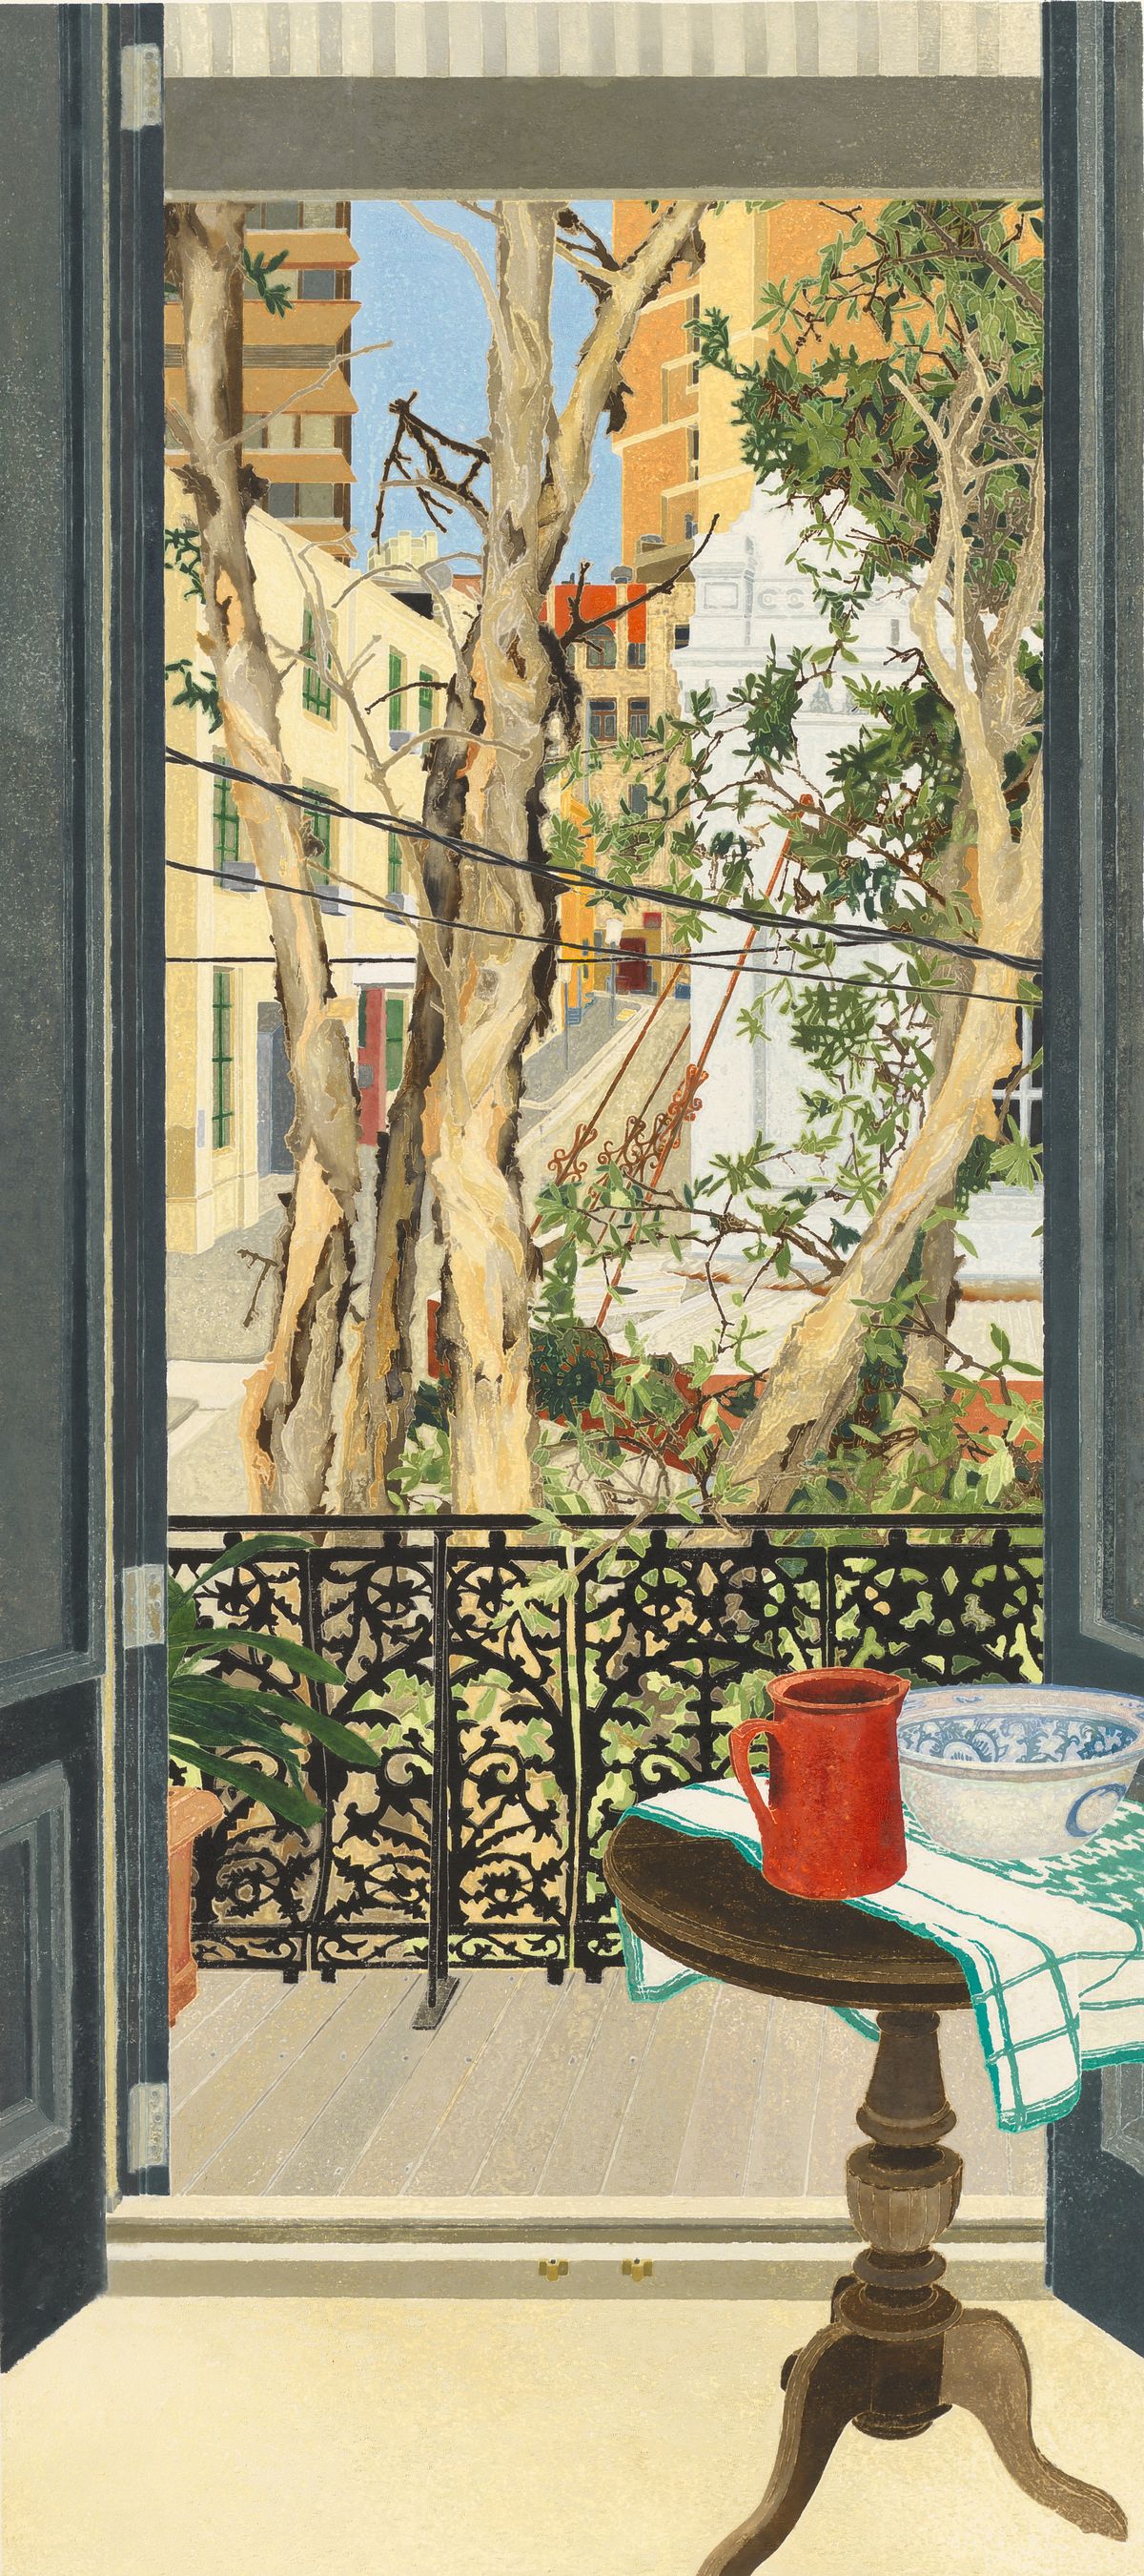 A door opens out onto a balcony. The view takes in trees and an inner urban street. A red jug sits on a table.